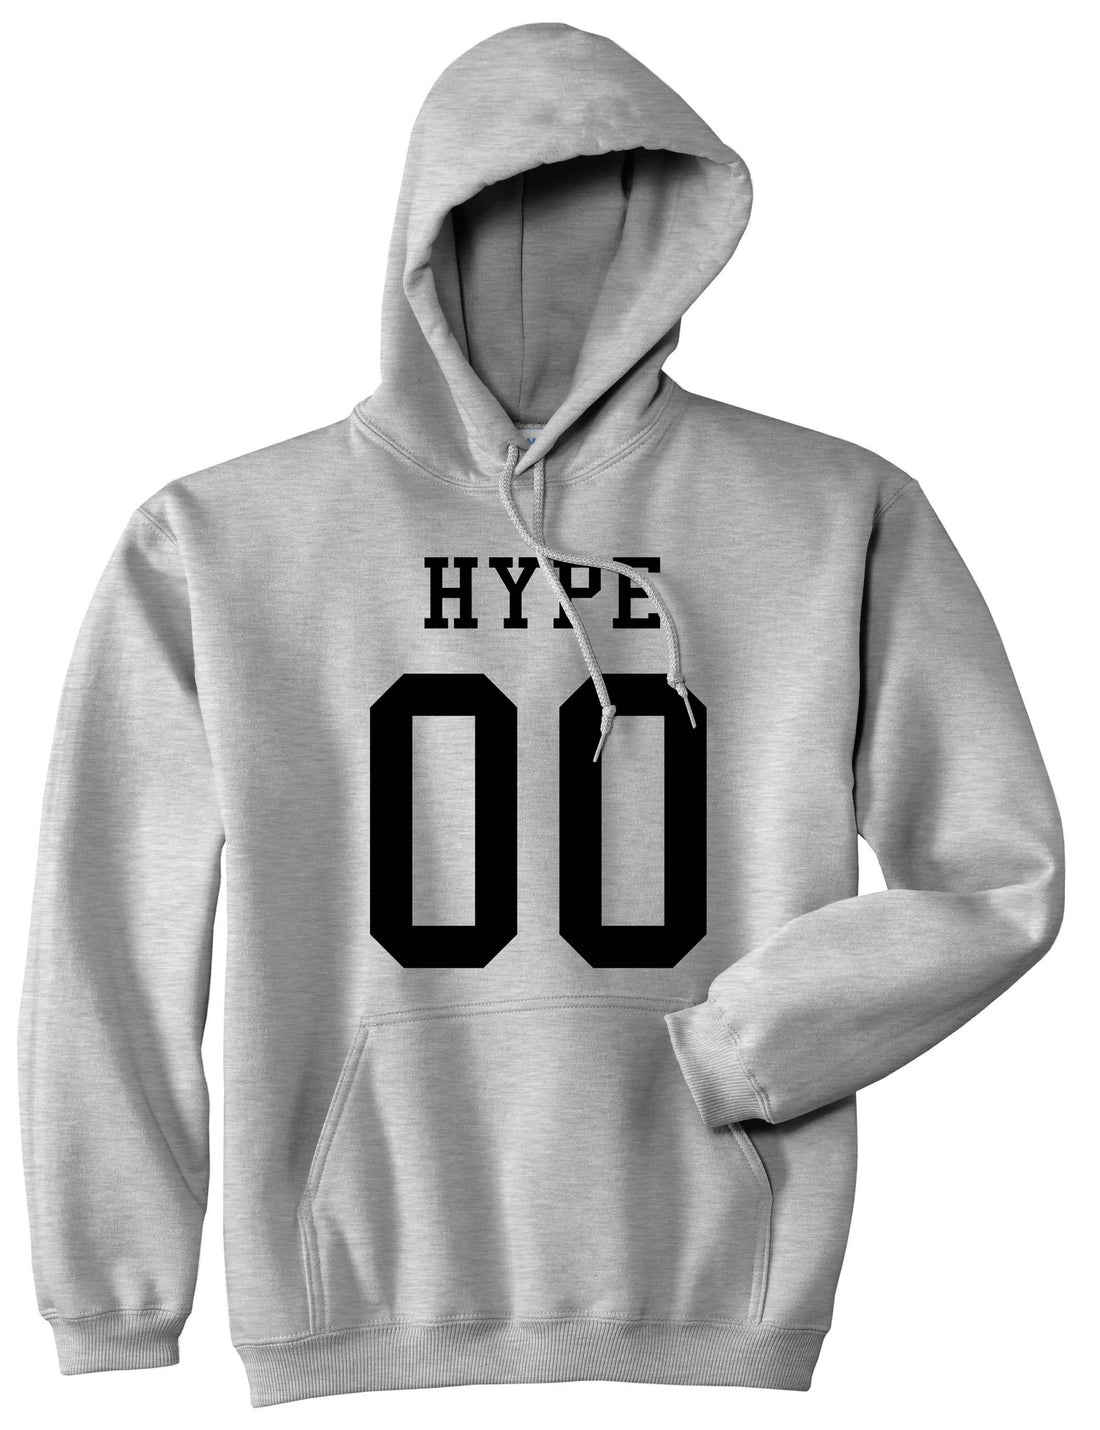 Hype Team Jersey Pullover Hoodie in Grey By Kings Of NY